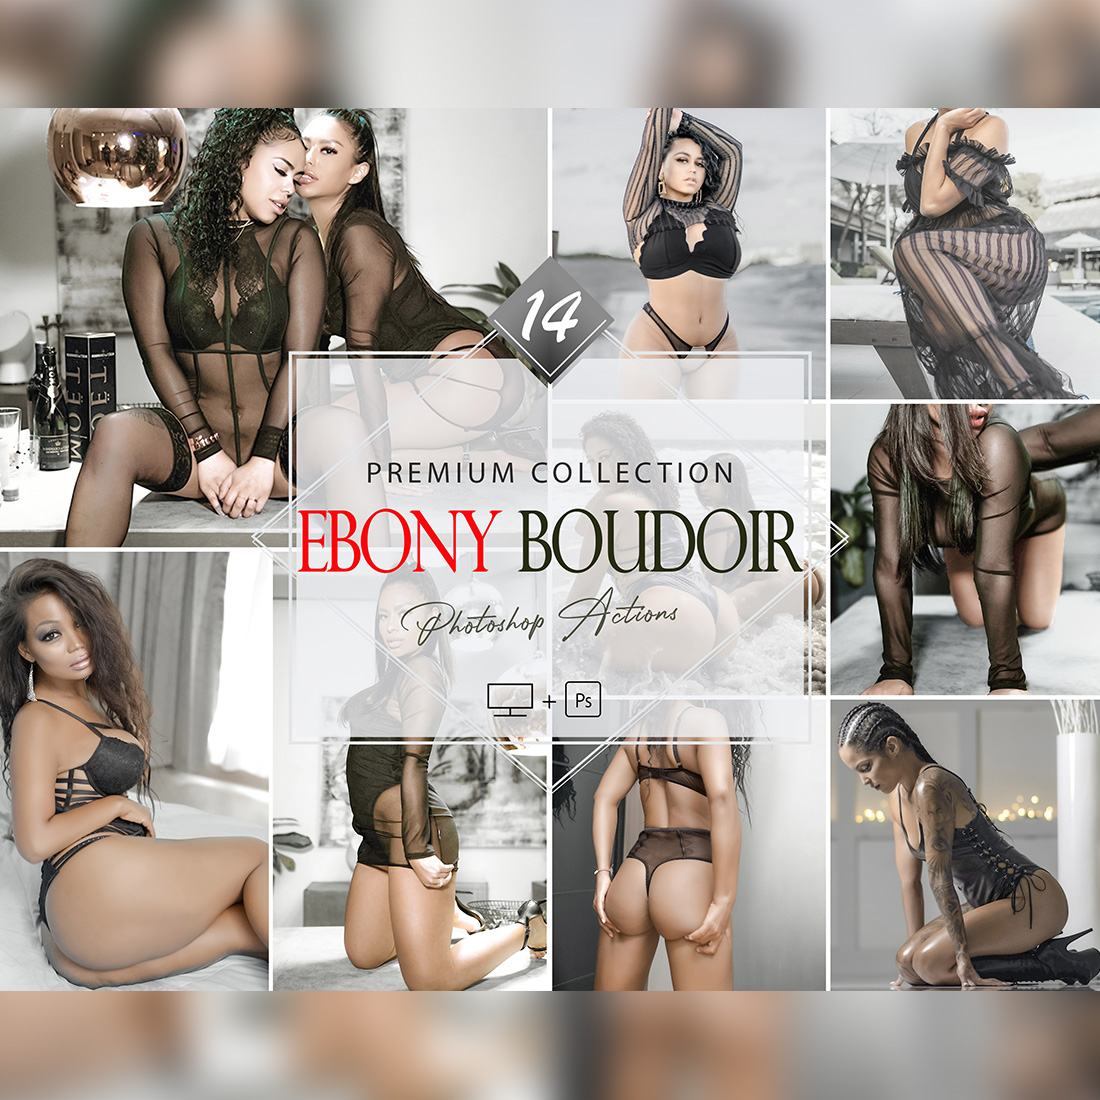 14 Ebony Boudoir Photoshop Actions, Sexy Natural ACR Preset, Atractive girl Filter, Portrait And Lifestyle Theme For Instagram, Blogger, Outdoor cover image.